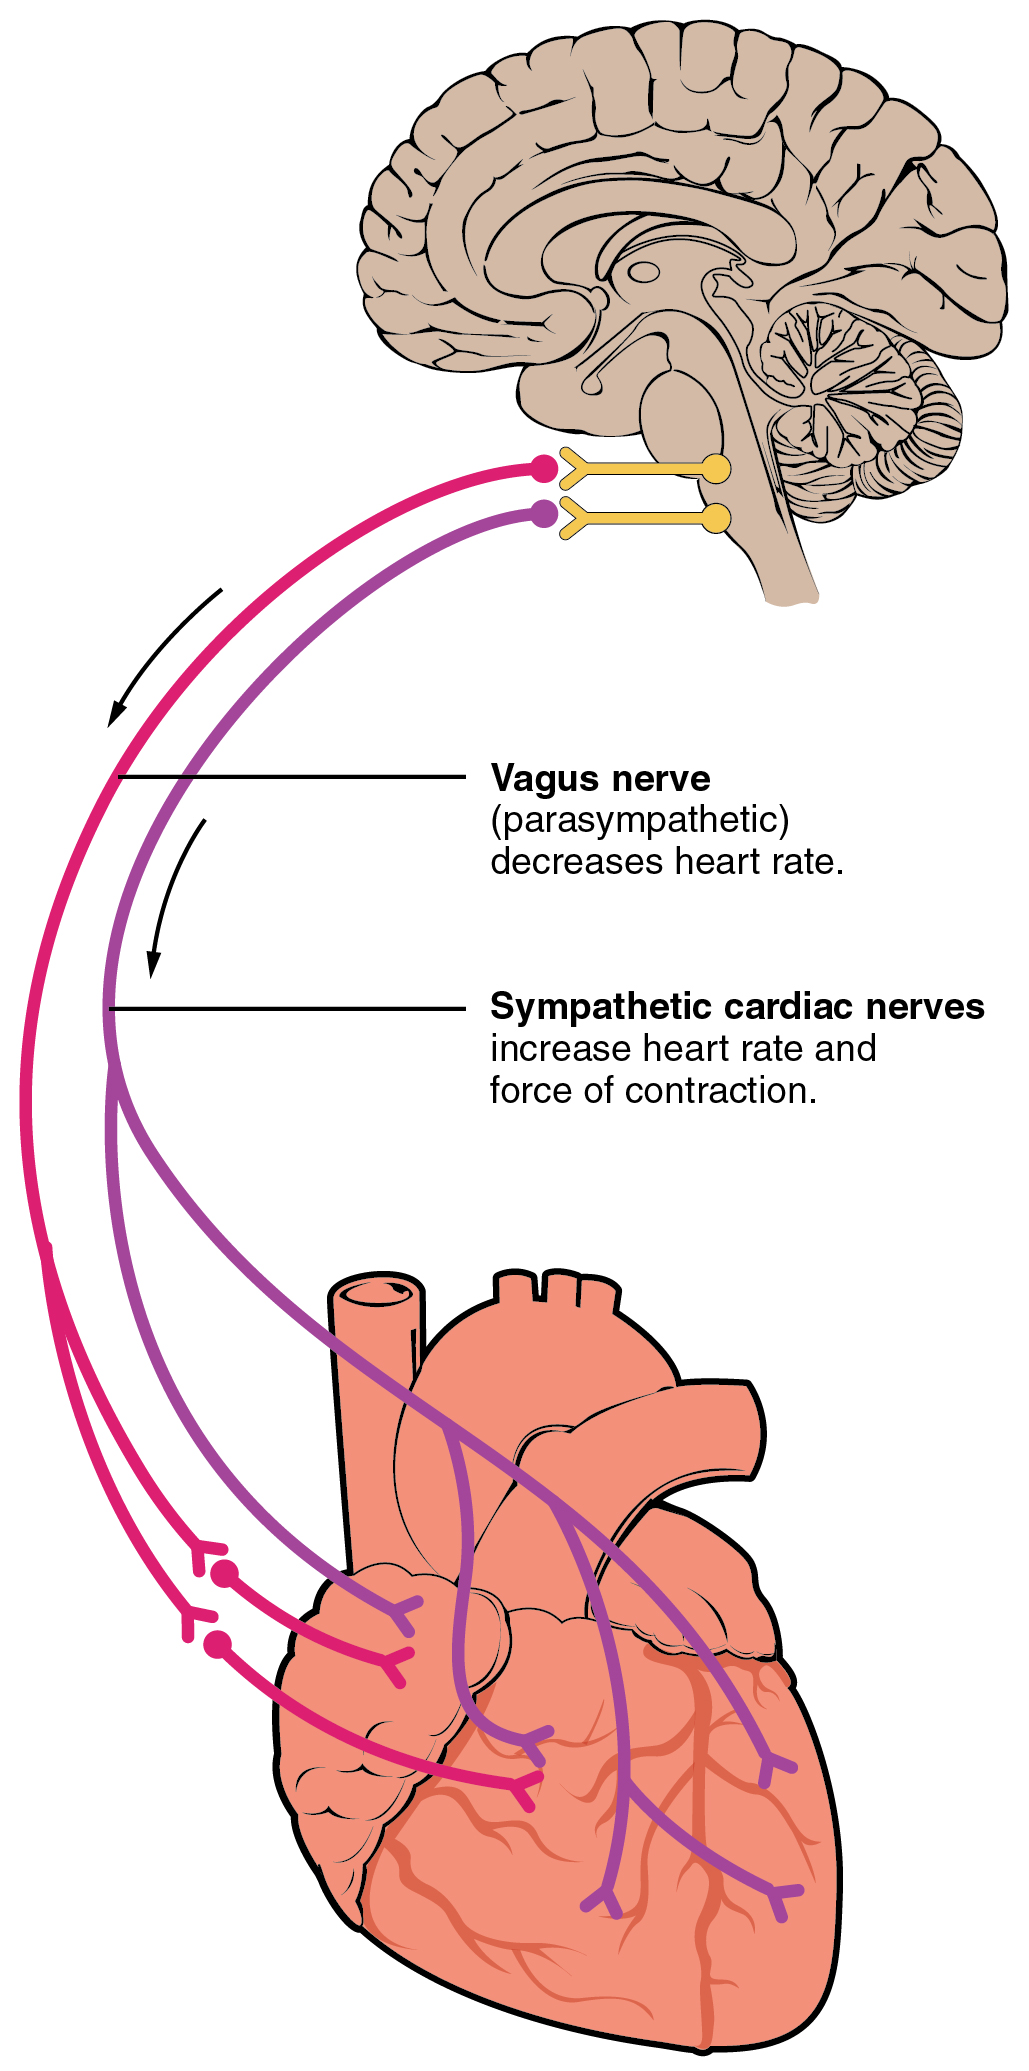 Autonomic innervation of the heart, from Openstax College